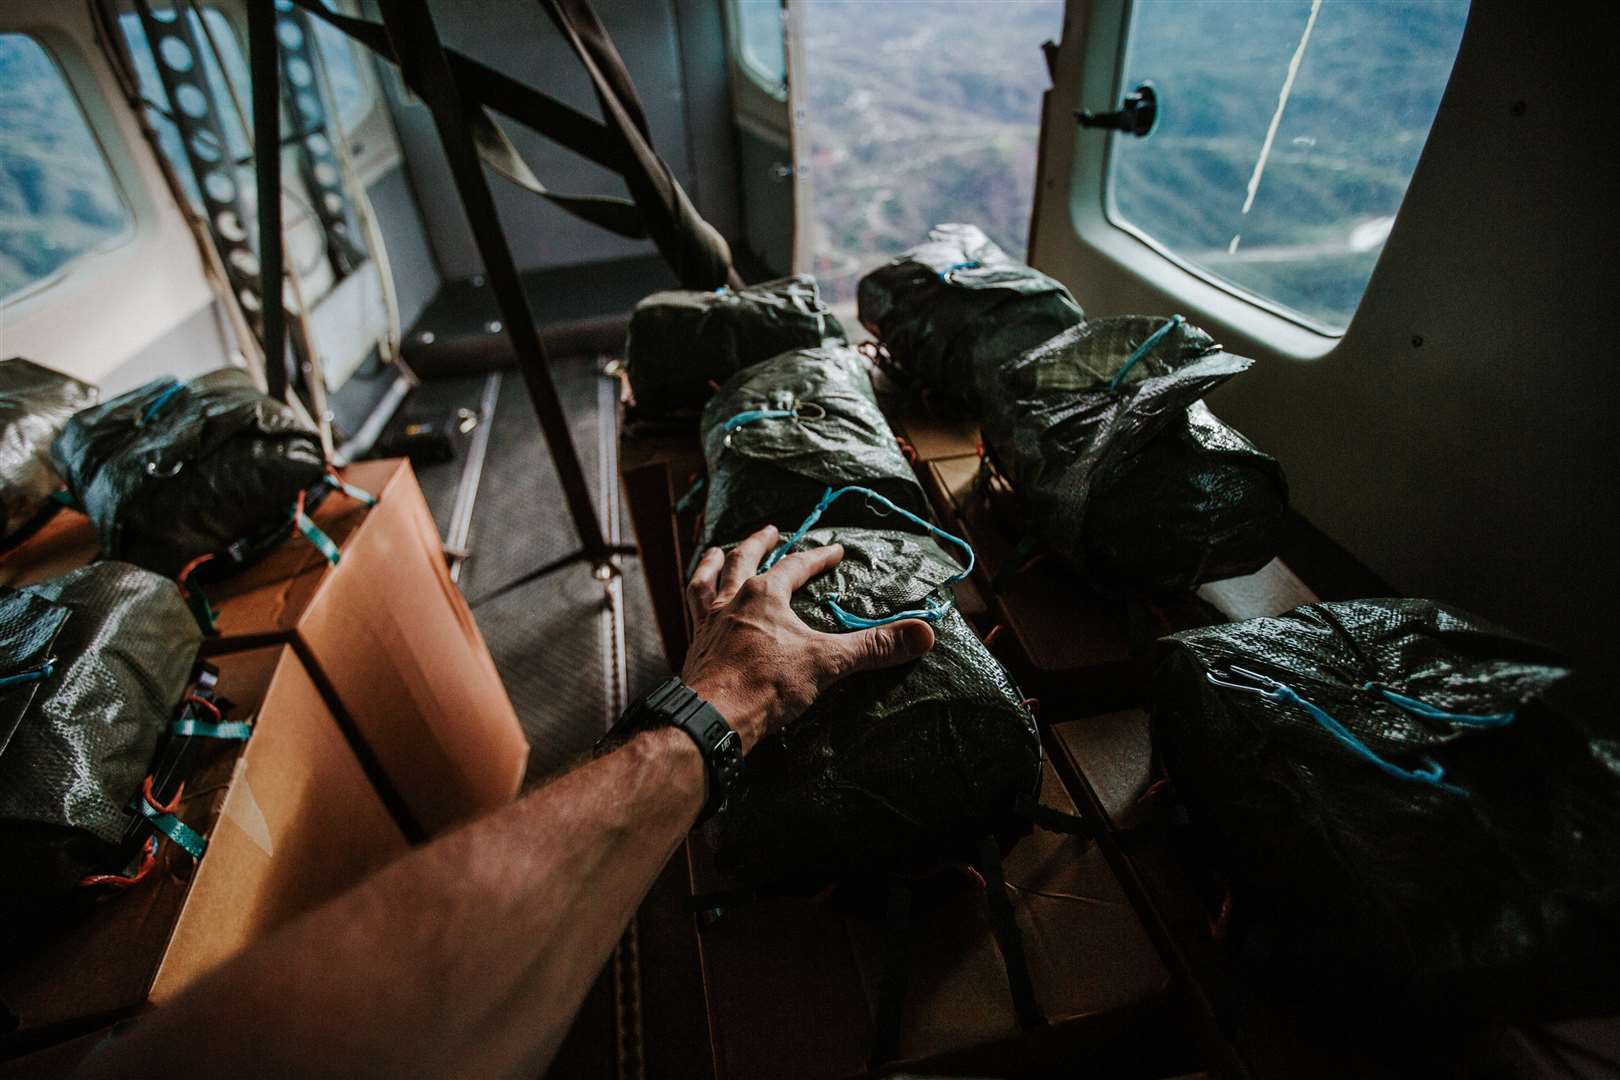 Air Drop Box systems were used in Puerto Rico in October to held with the aid effort following Hurricanes Irma and Maria